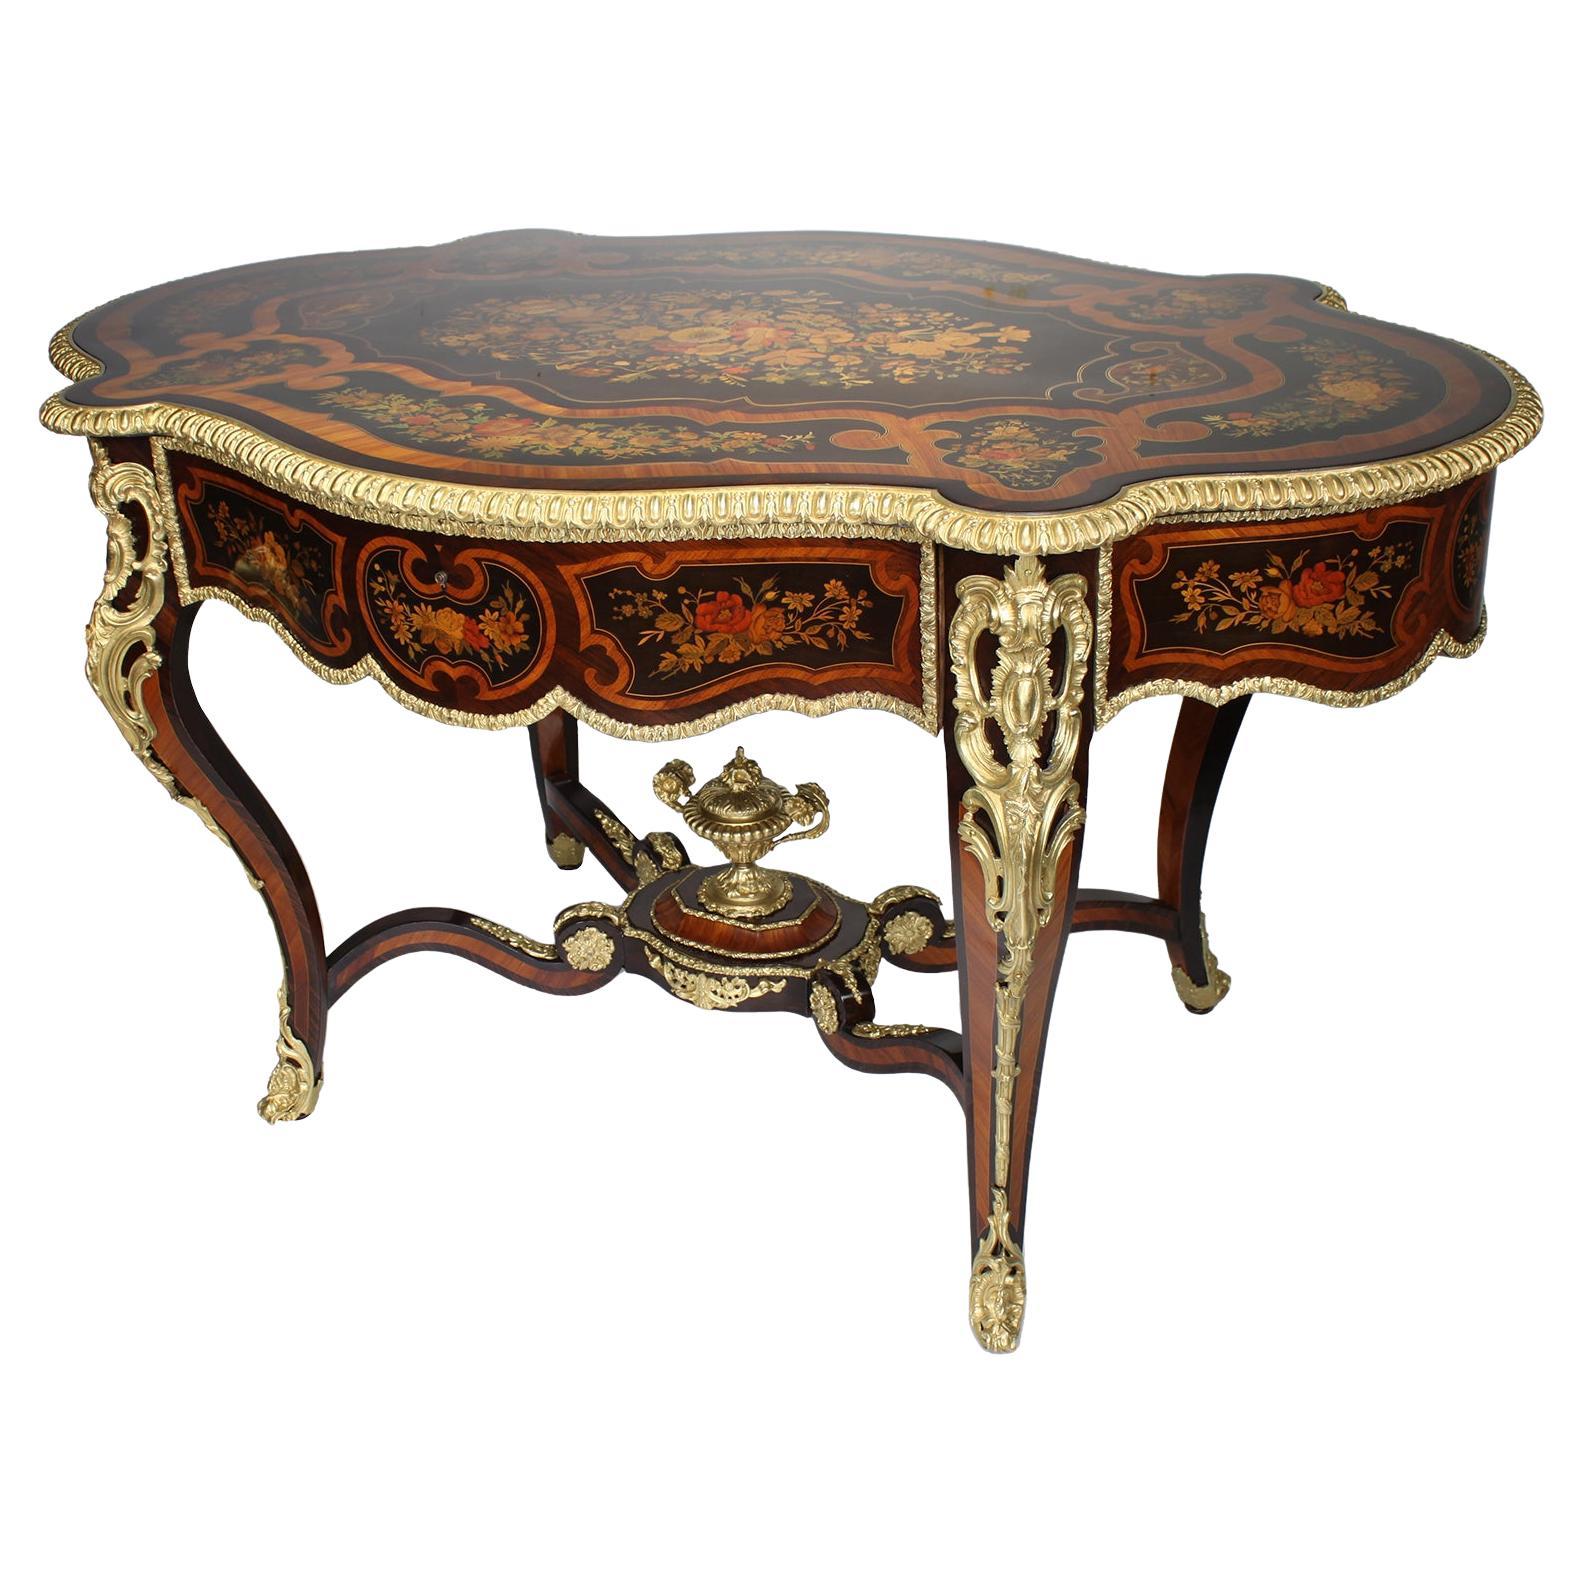 French 19th Century Louis XV Style Gilt-Bronze Mounted Marquetry Center Table